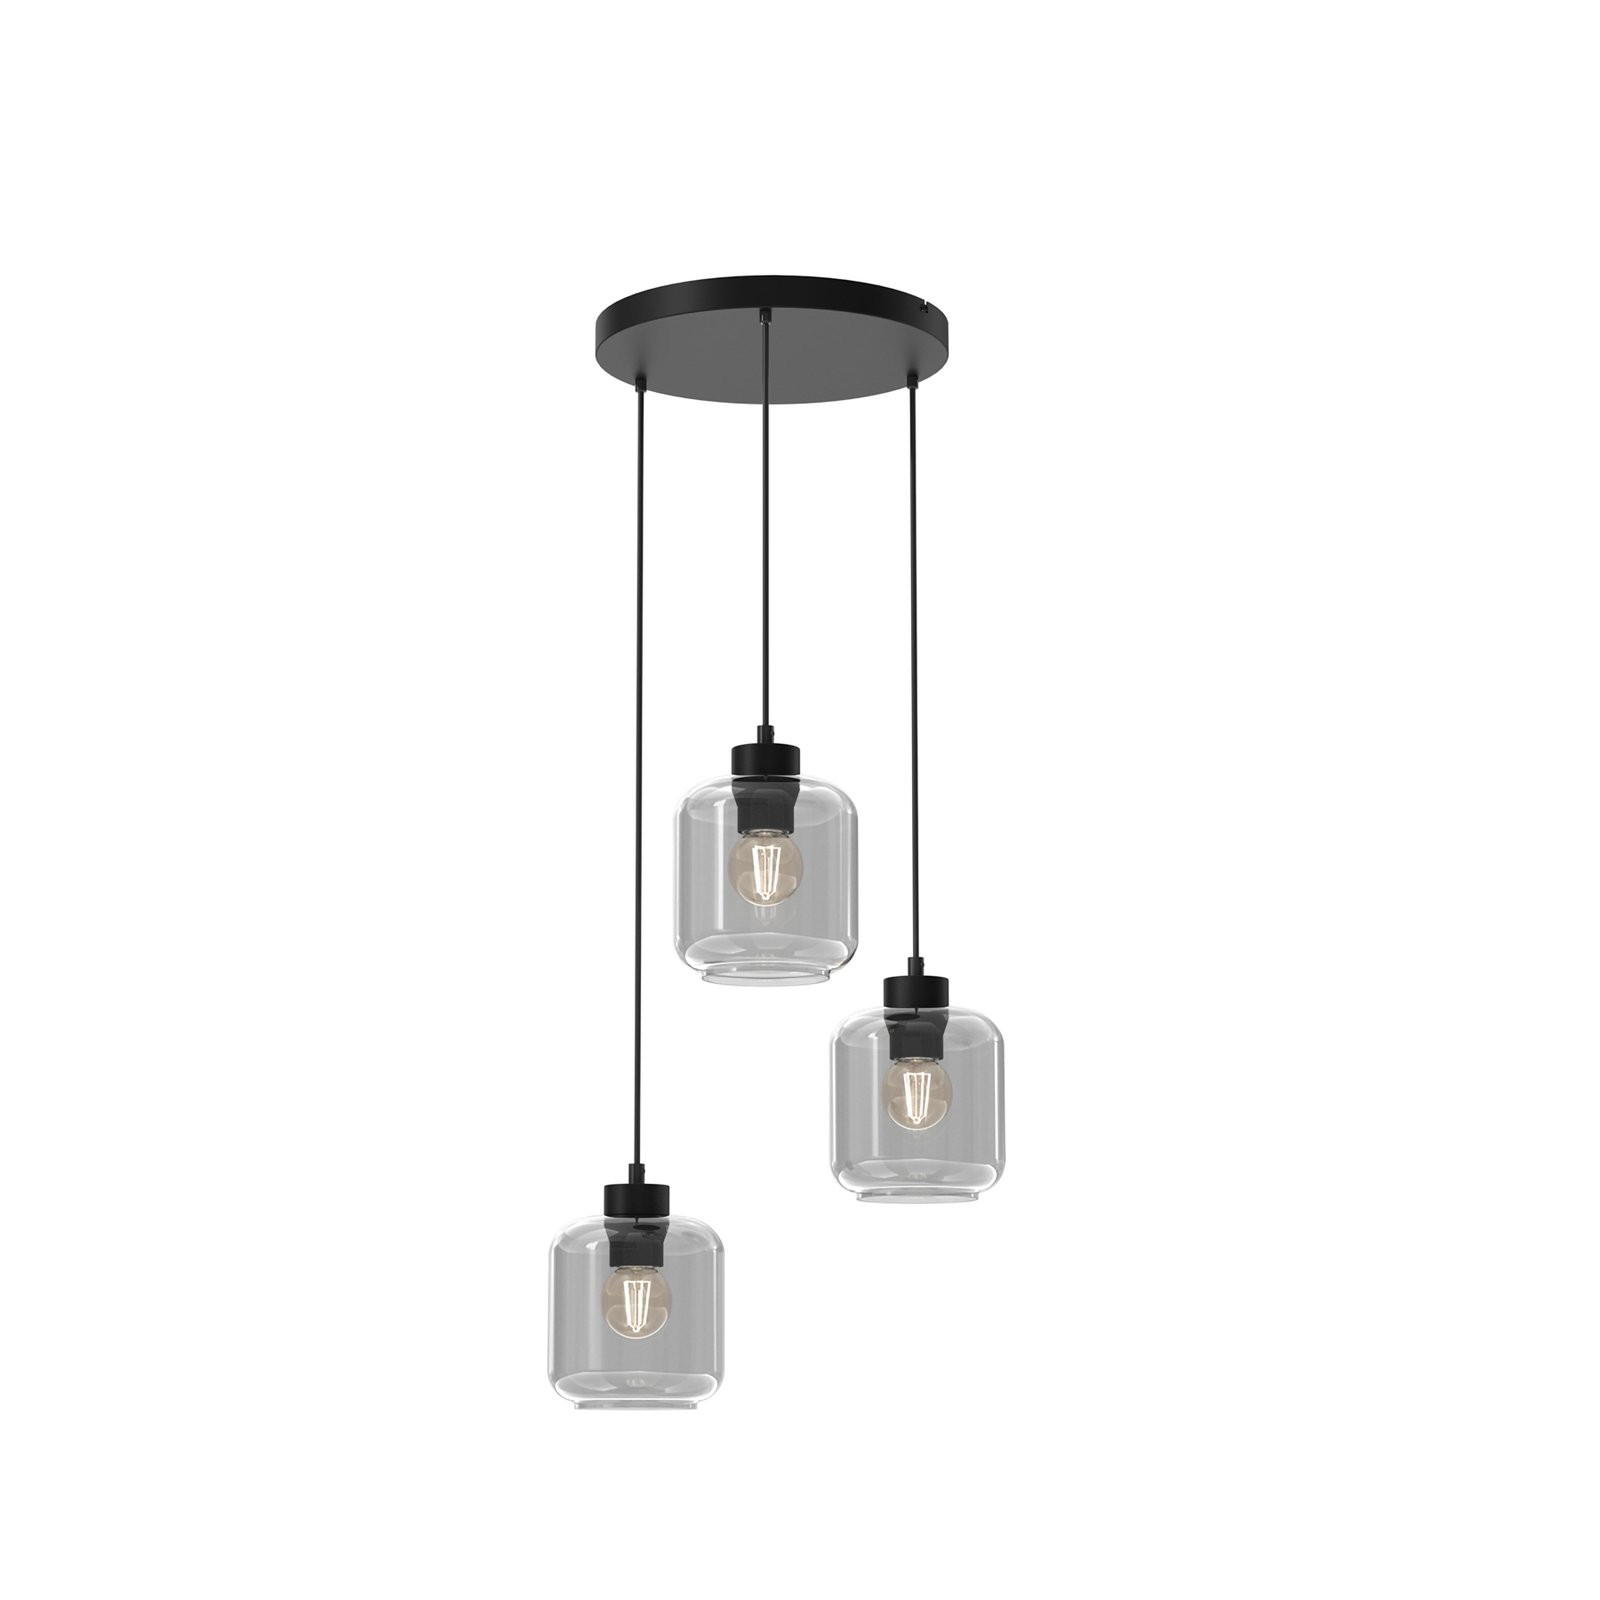 Hanglamp Sombra, rook, 3-lamps, rond